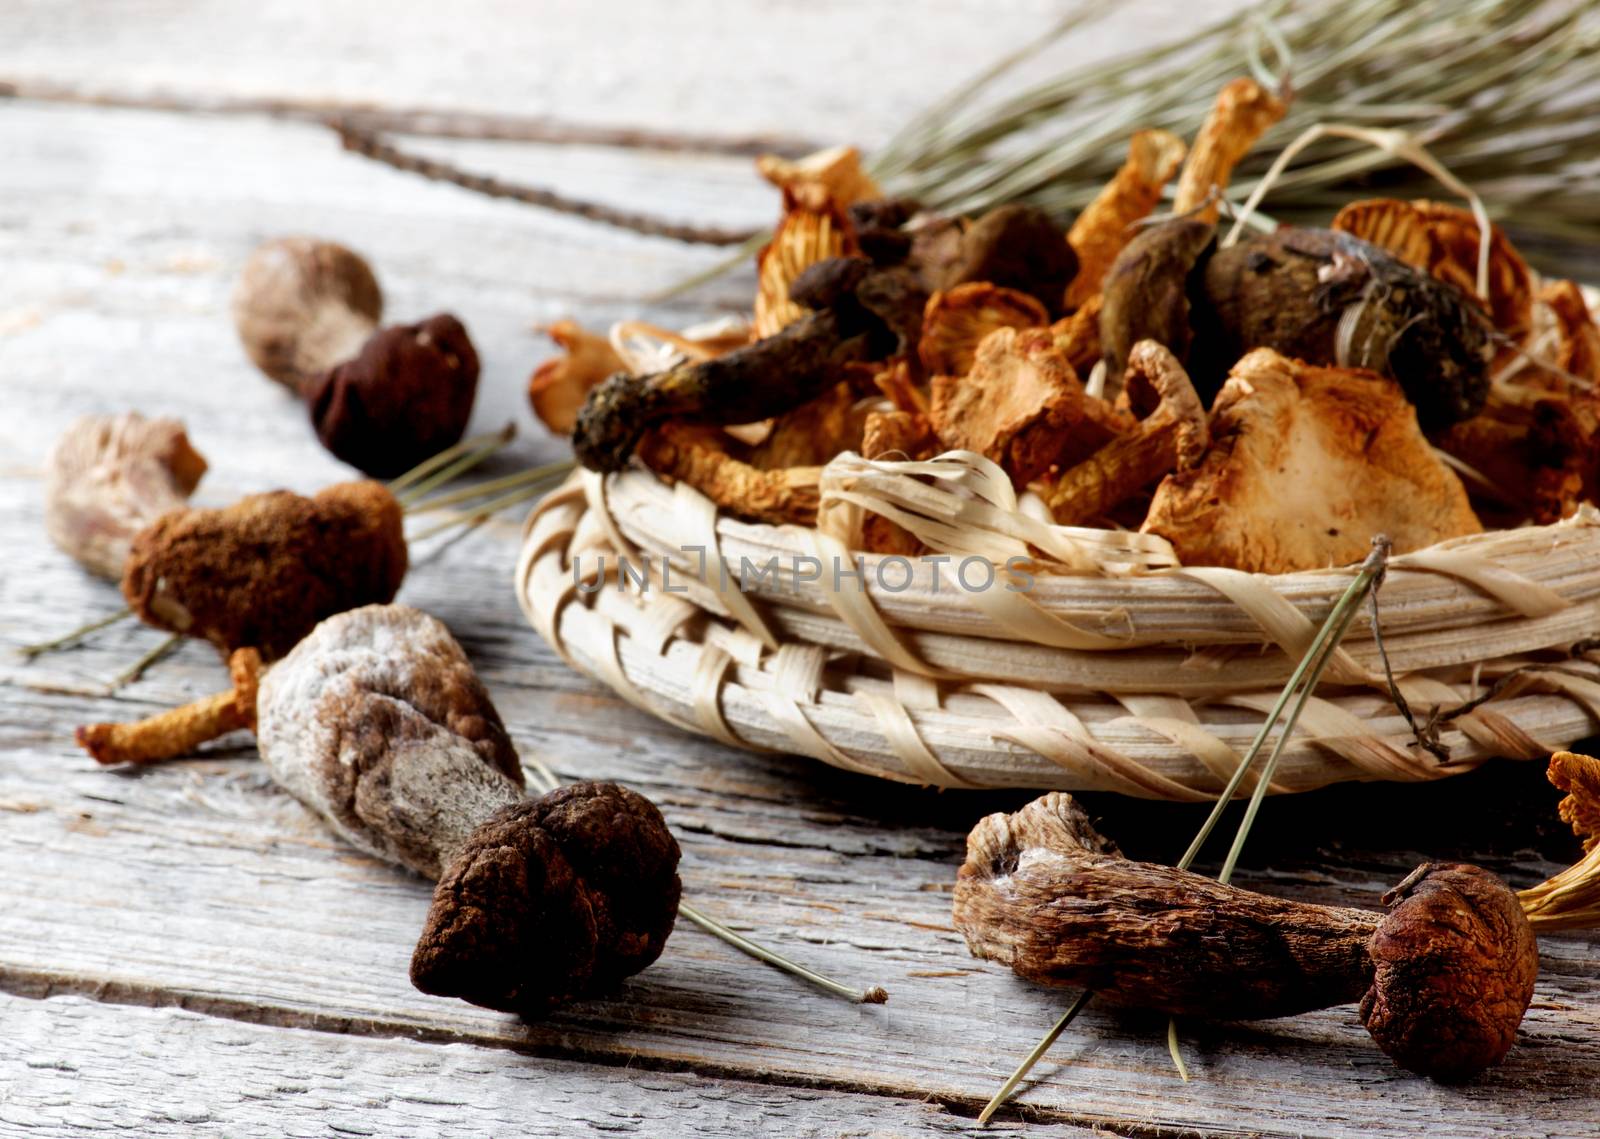 Arrangement of Forest Dried Mushrooms with Chanterelles, Porcini, Boletus Mushrooms and Dry Stems closeup Rustic Wooden background. Focus on Foreground